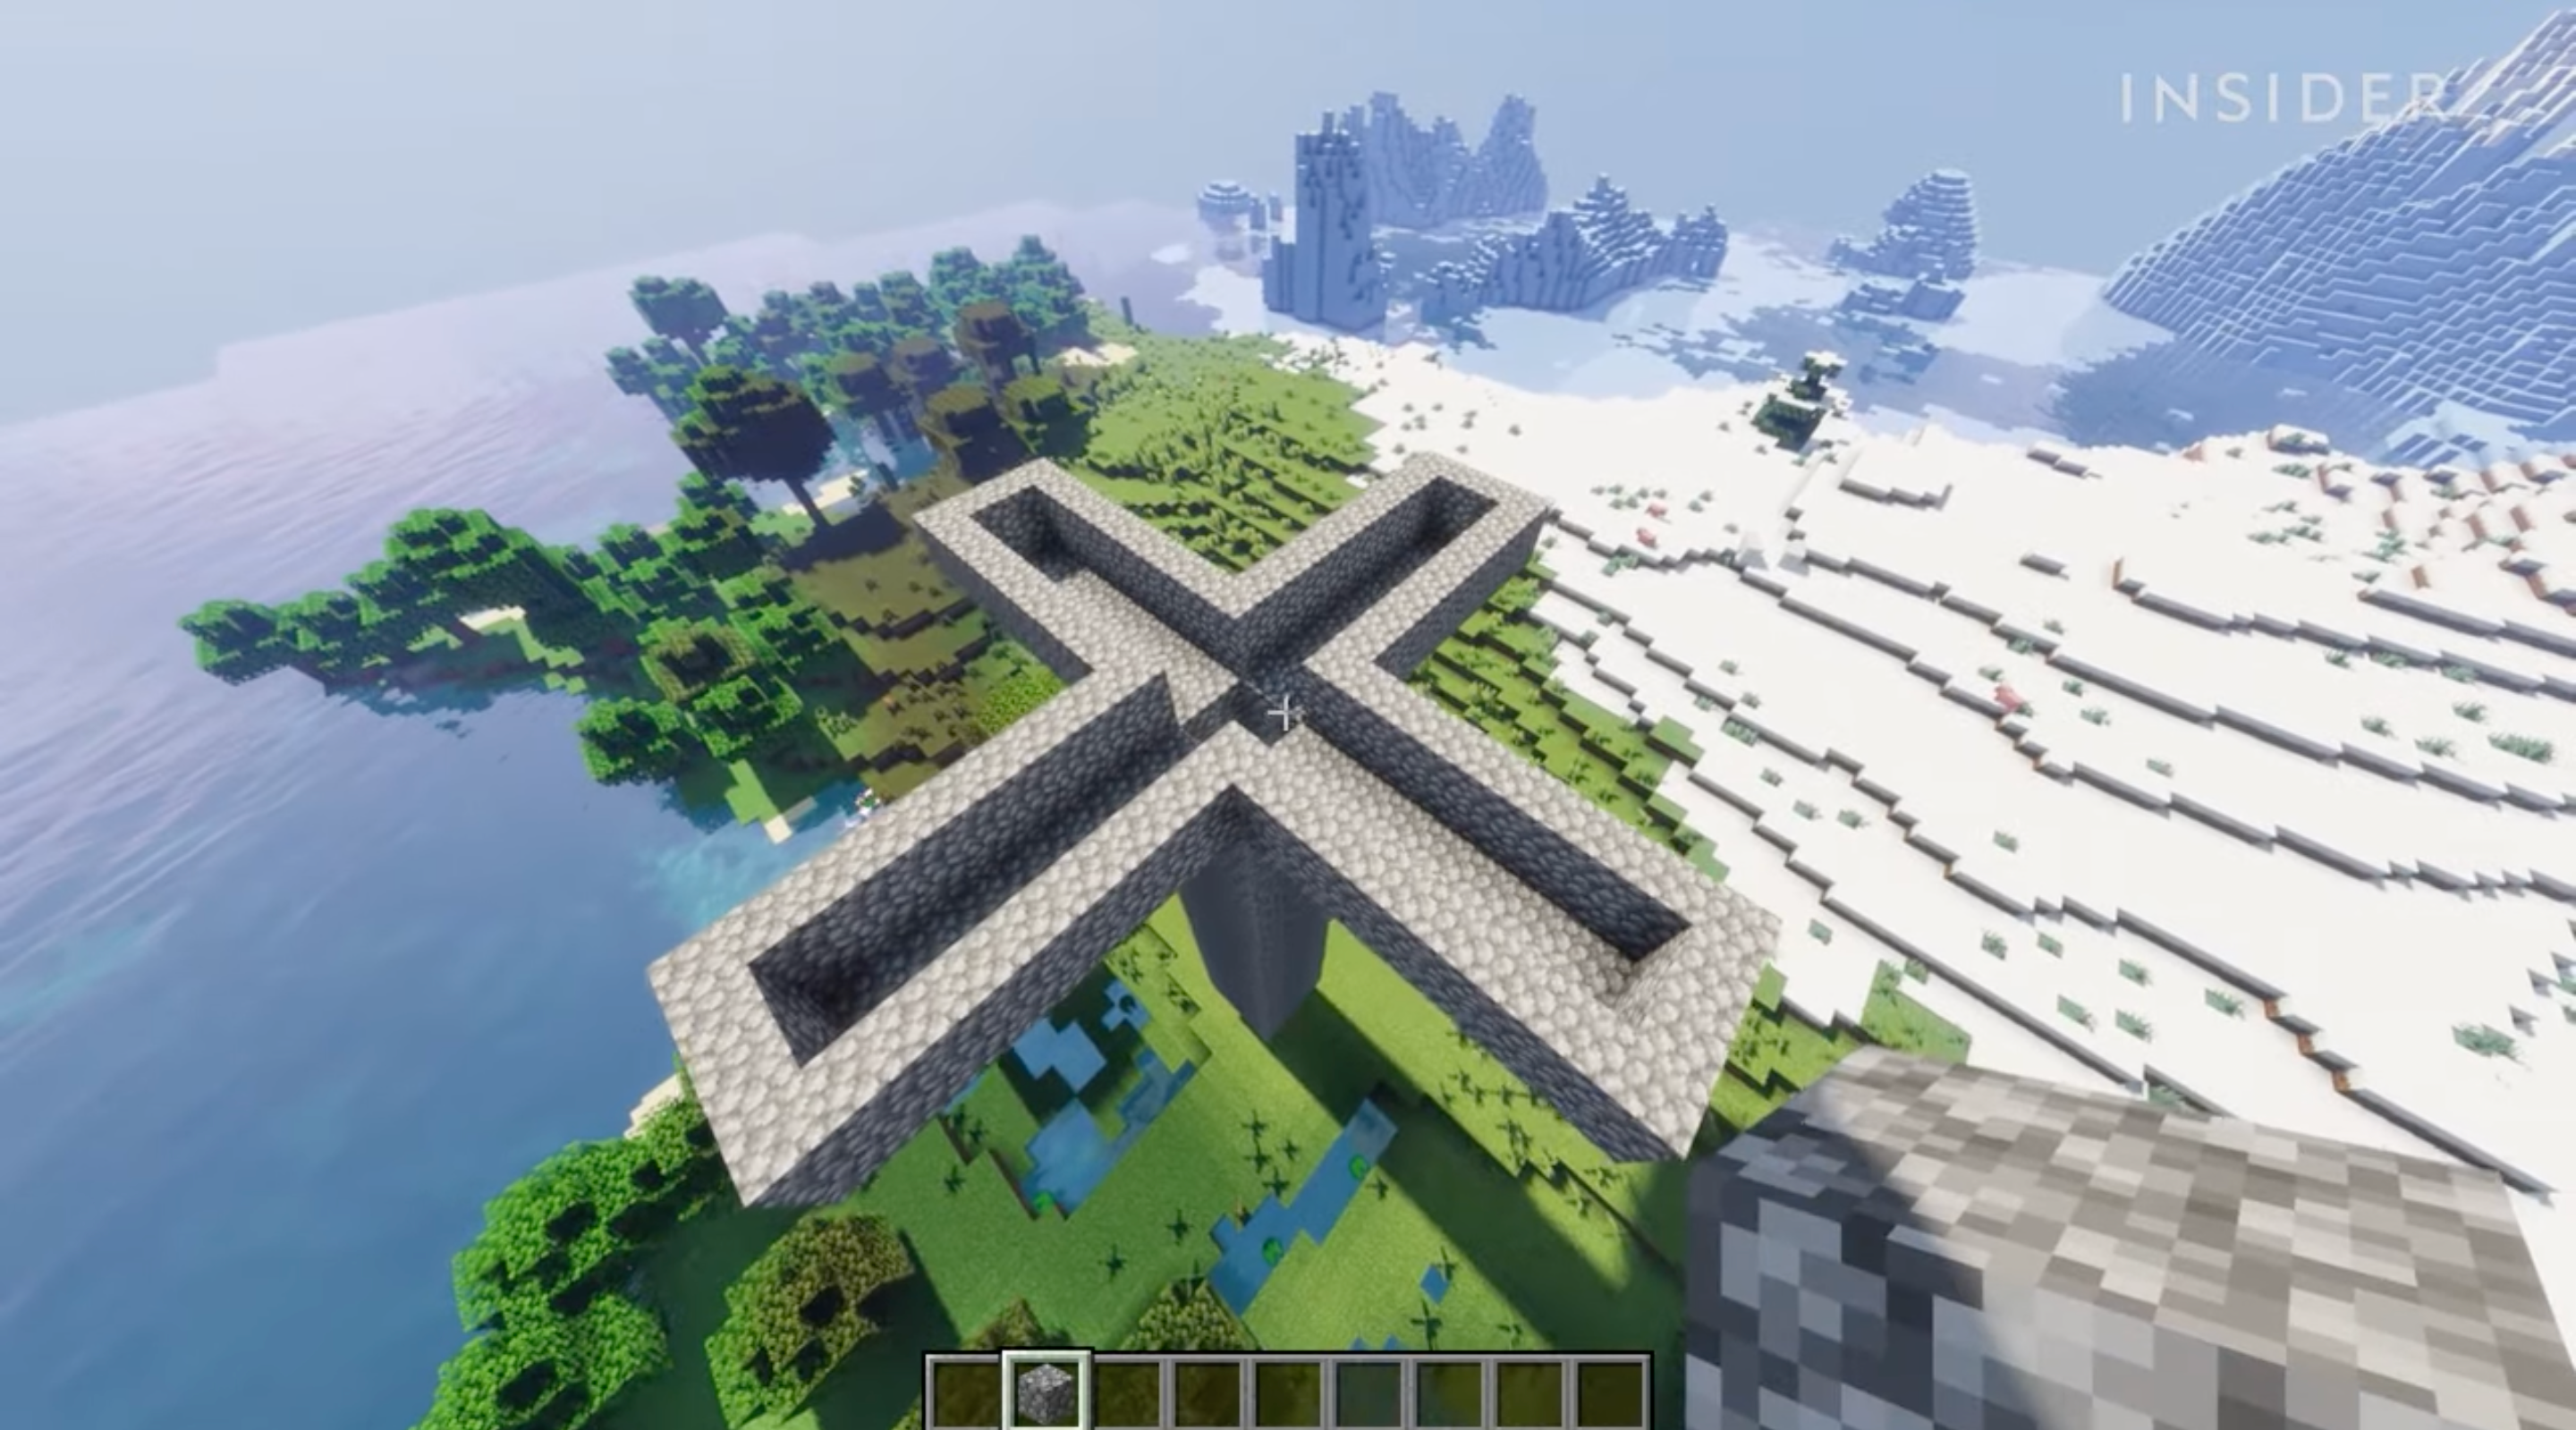 A screenshot from Minecraft, showing the completed mob farm well and bridges.